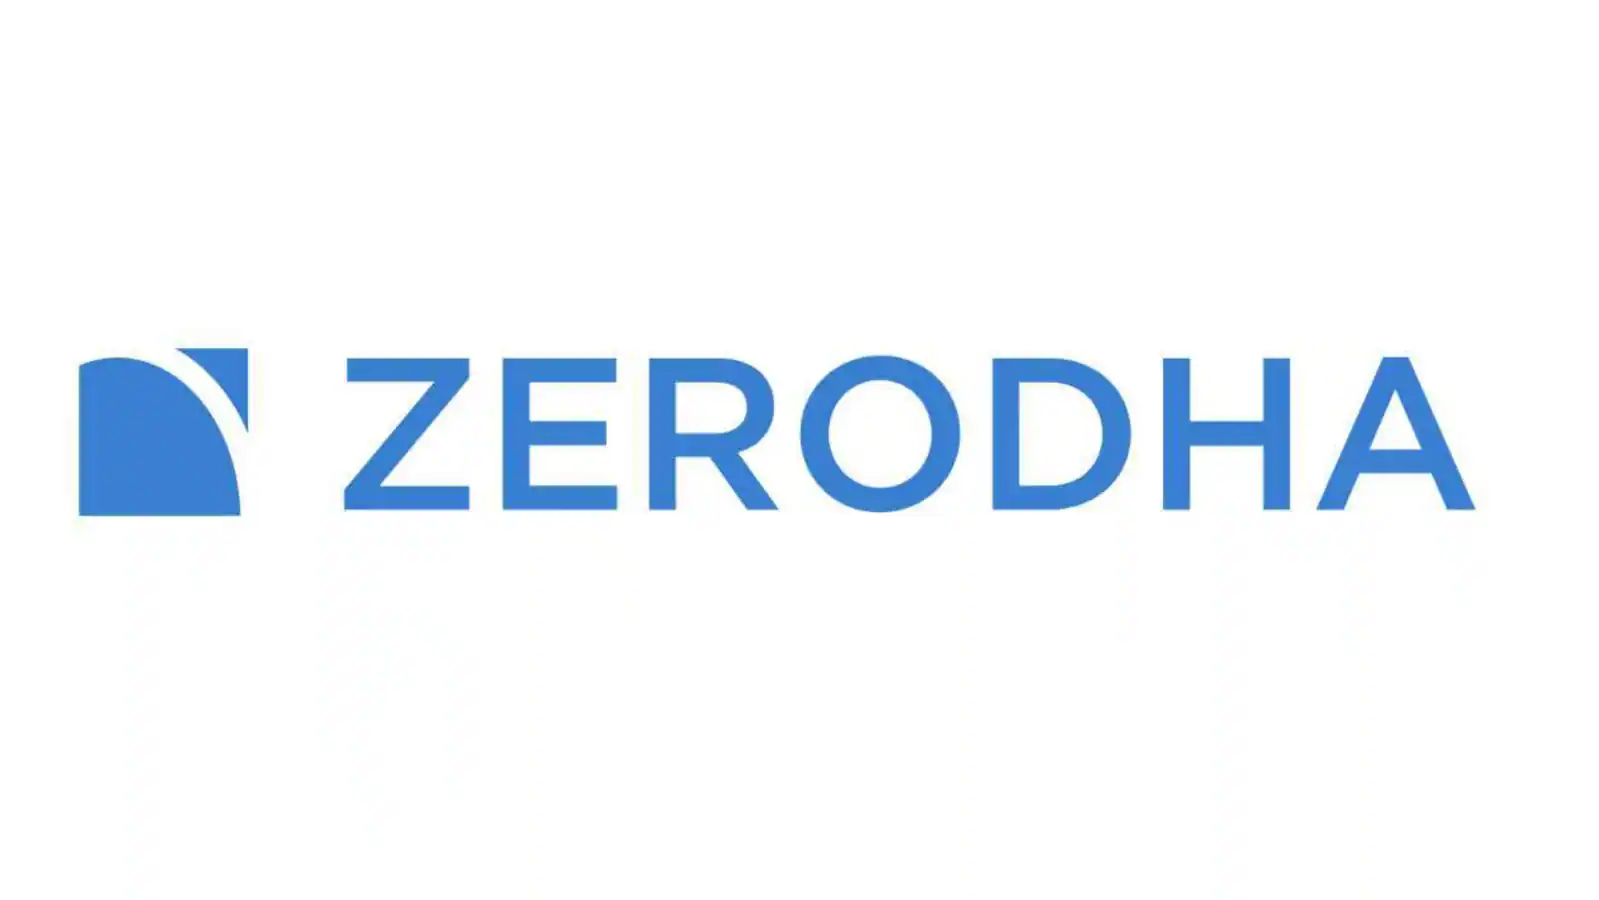 Zerodha Soars Robust Financial Performance Amidst Competition and Client Base Concerns